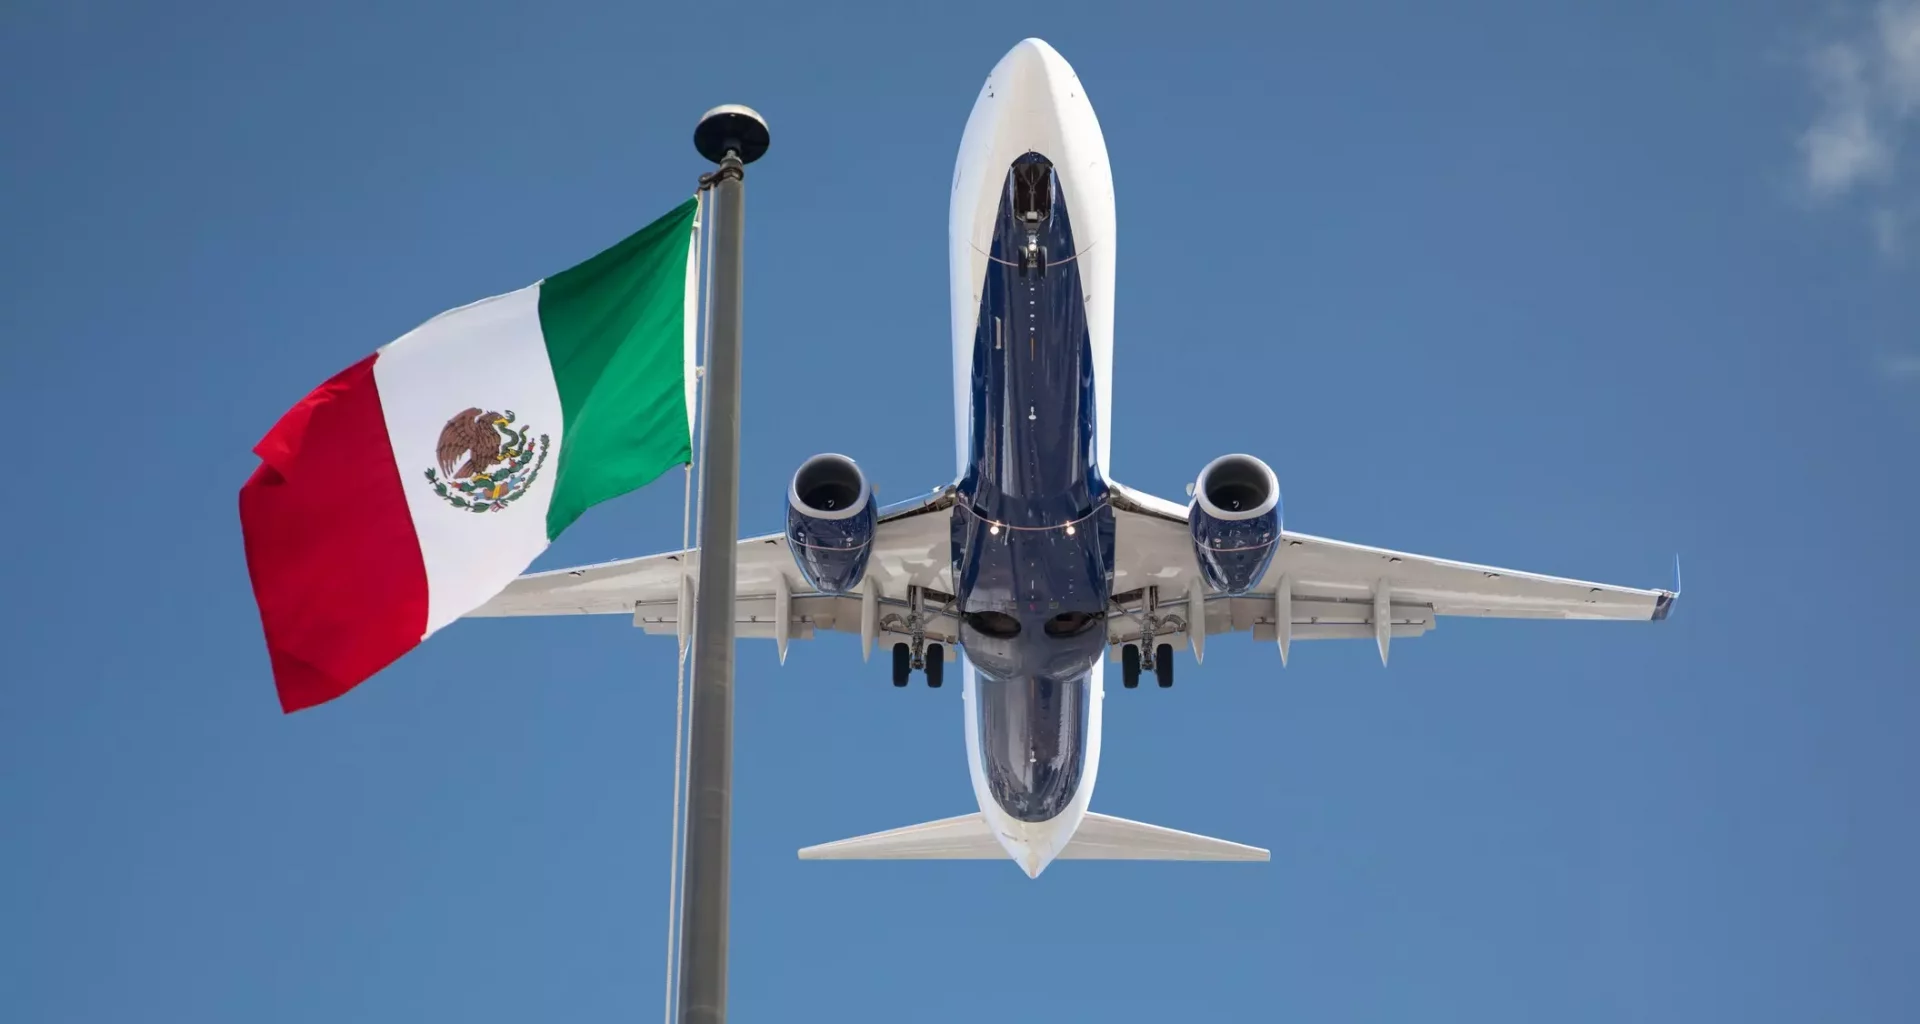 Mexican aviation industry